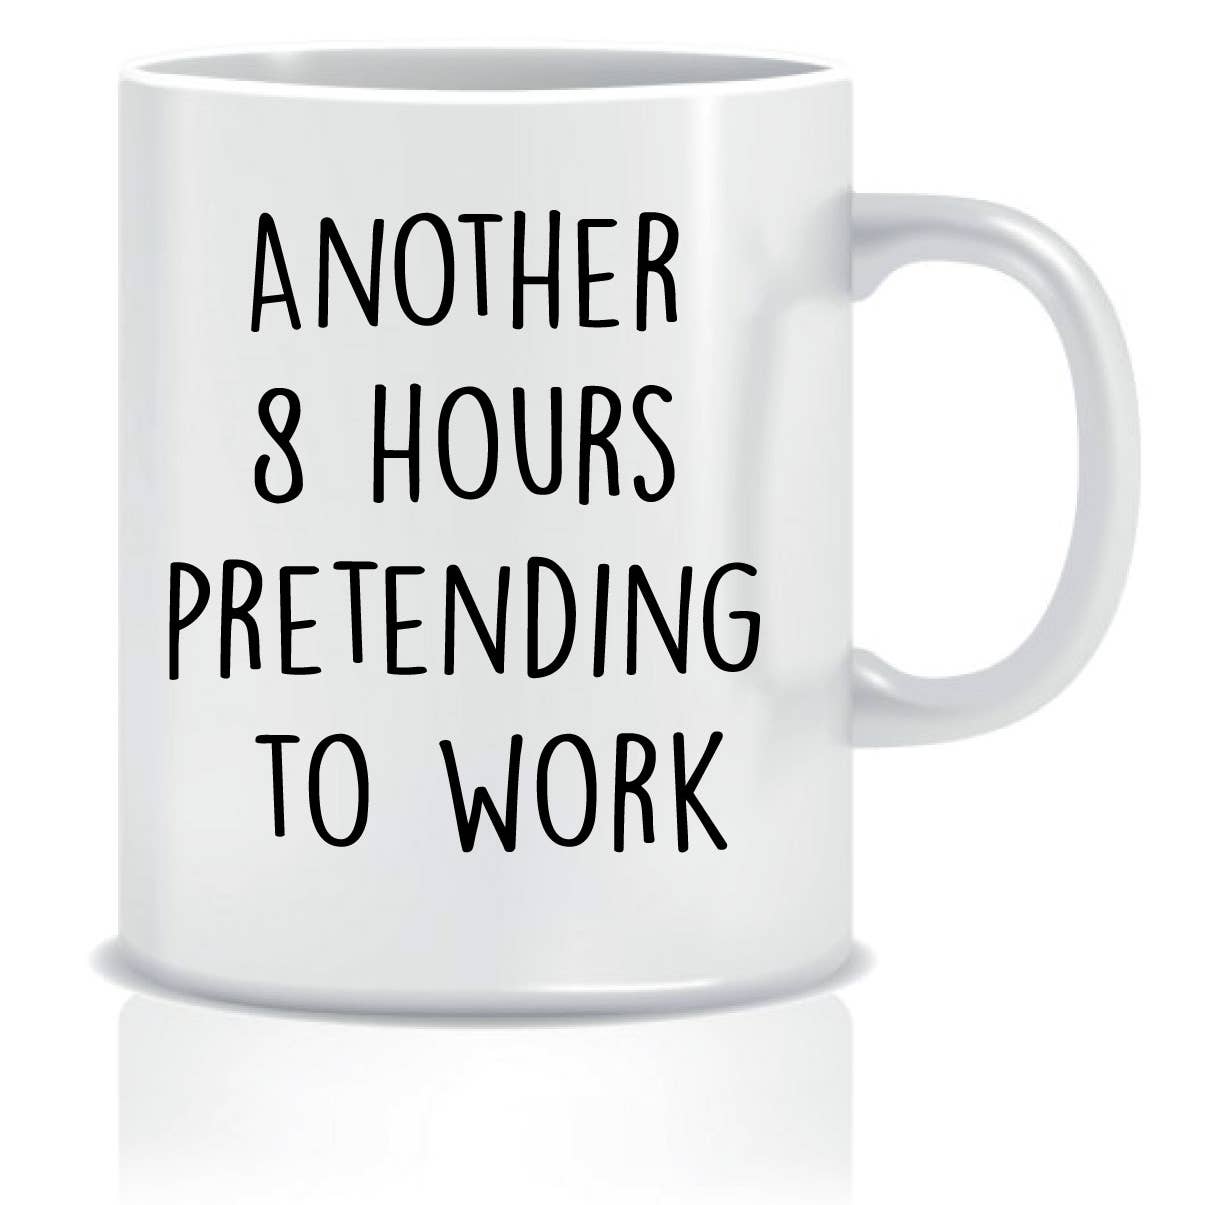 Another 8 Hours Pretending To Work Mug